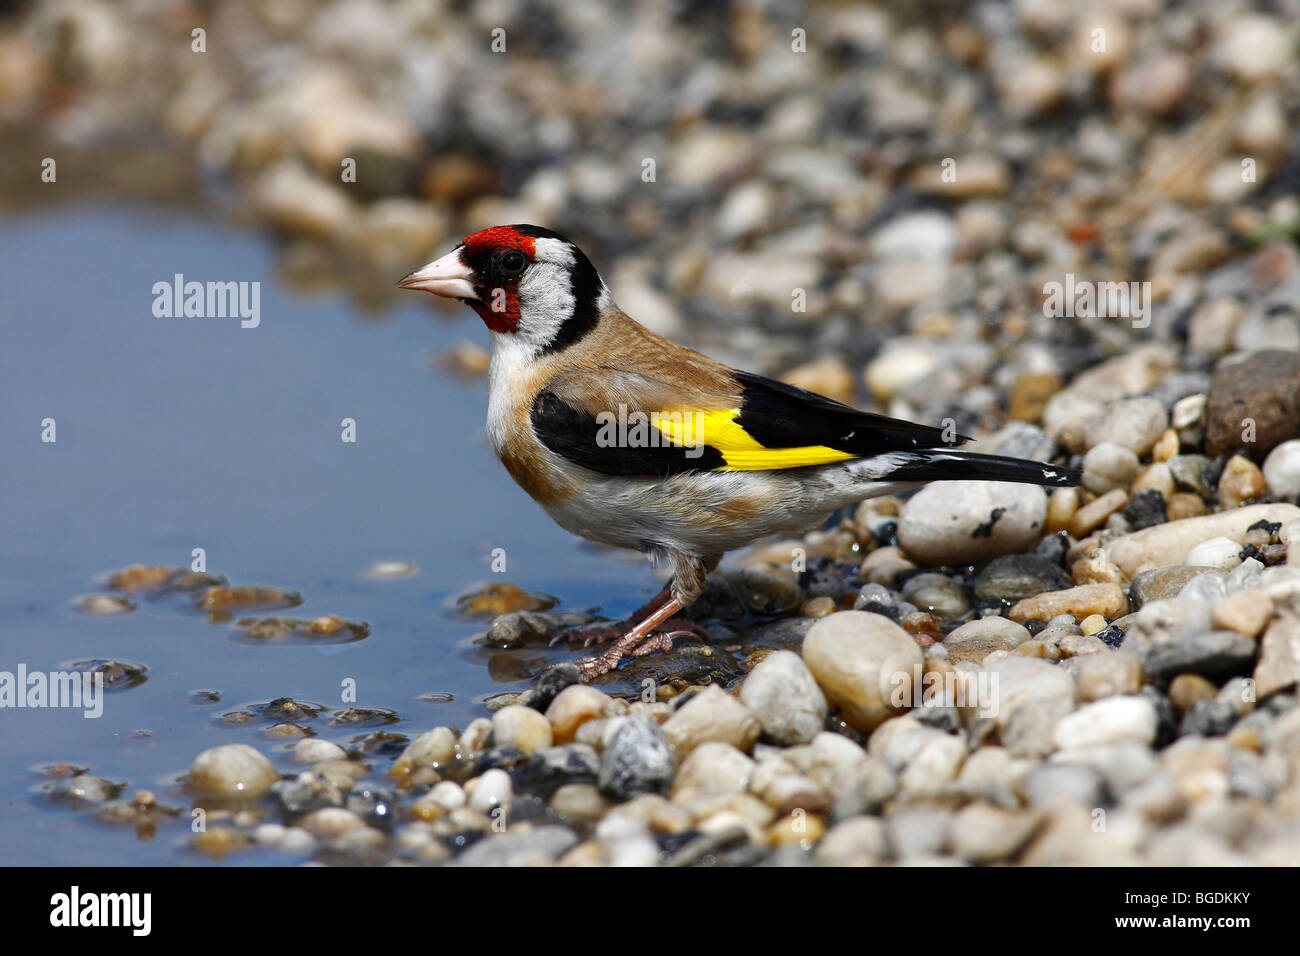 Goldfinch or European Goldfinch (Carduelis carduelis) standing at the edge of a puddle, Lake Neusiedl, Burgenland, Austria, Eur Stock Photo